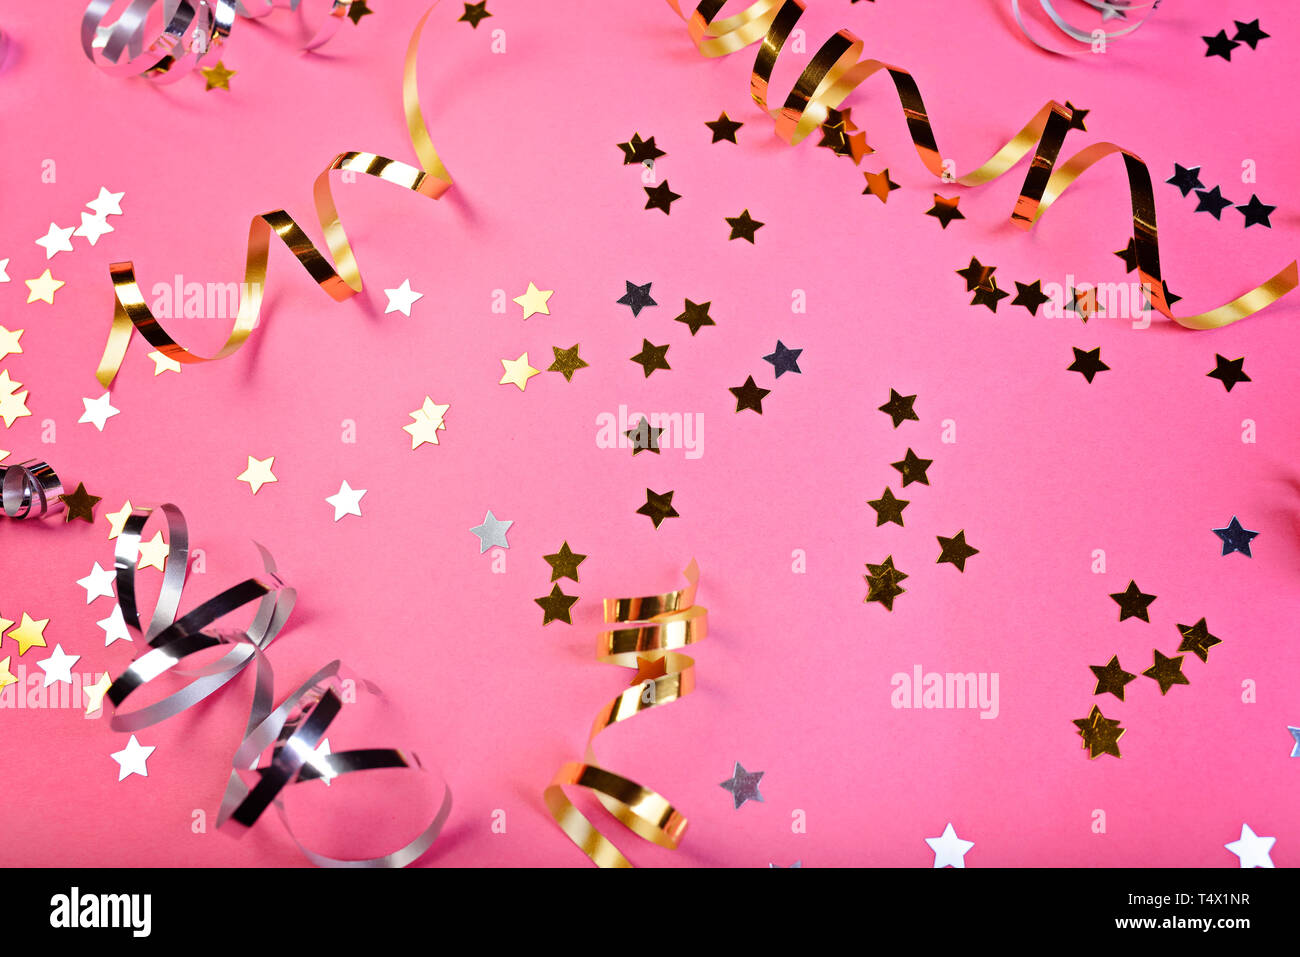 Background about a party, confetti, stars and streamers. Stock Photo